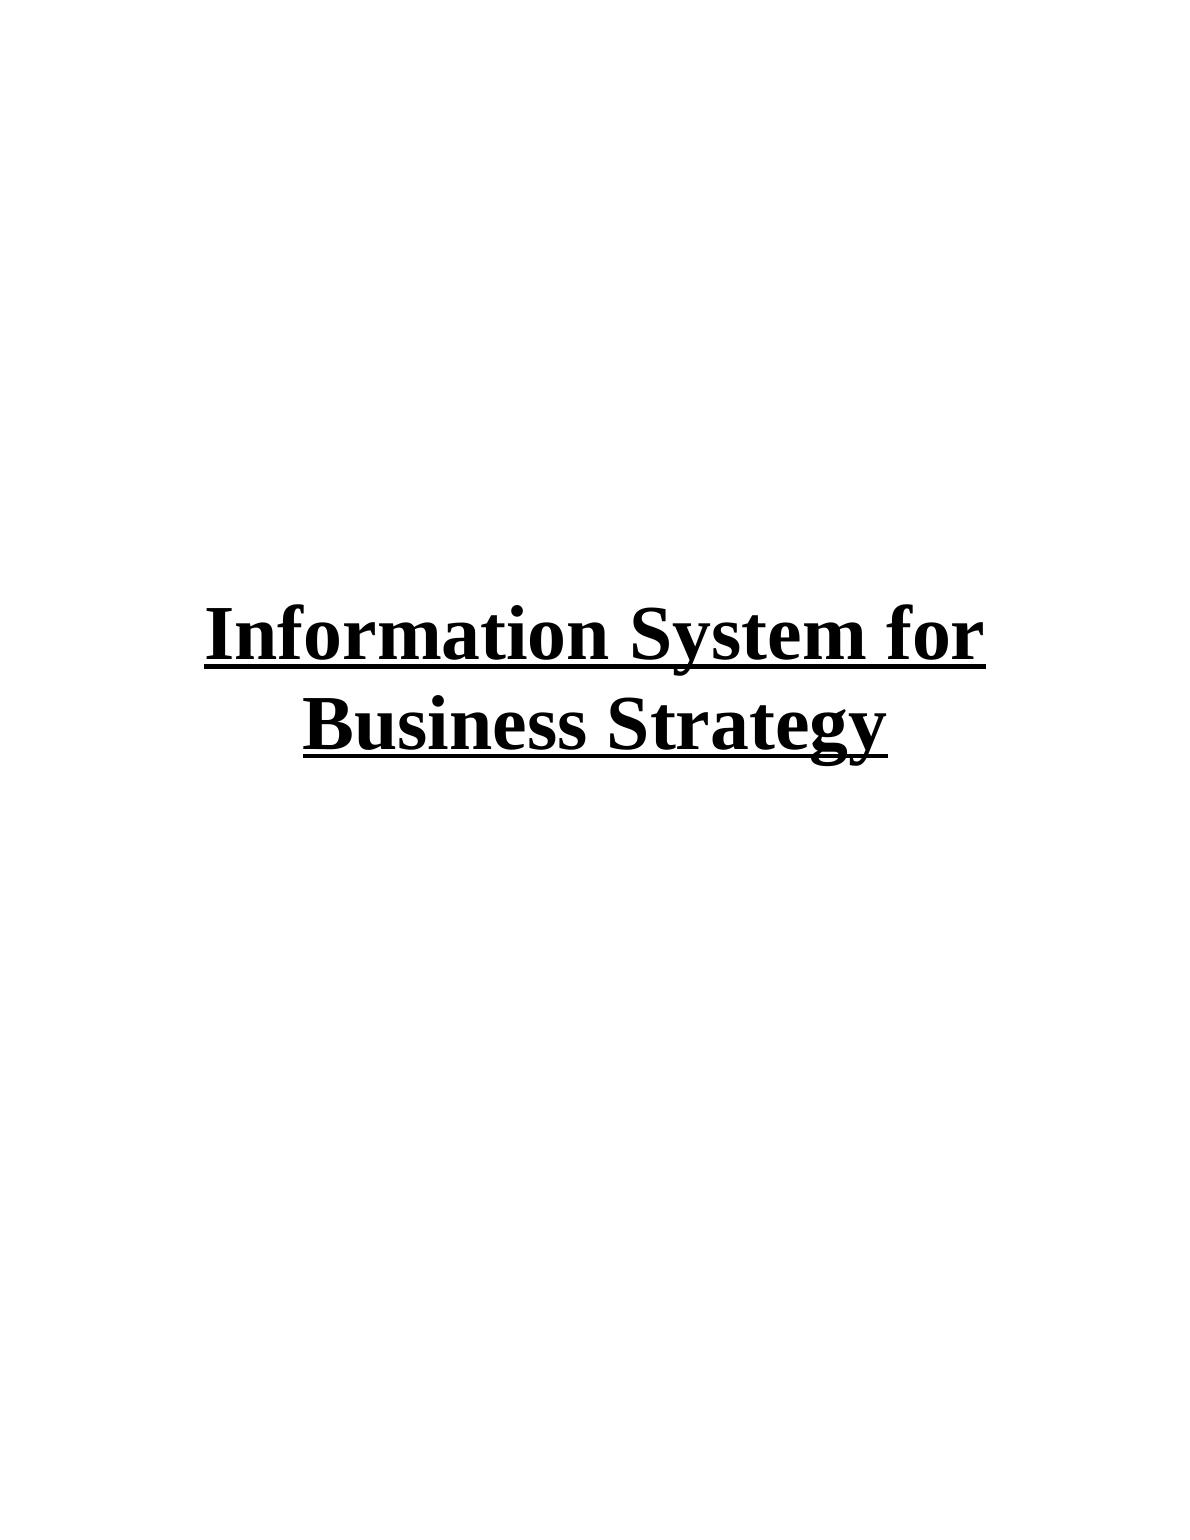 Information System for Business Strategy - Report_1